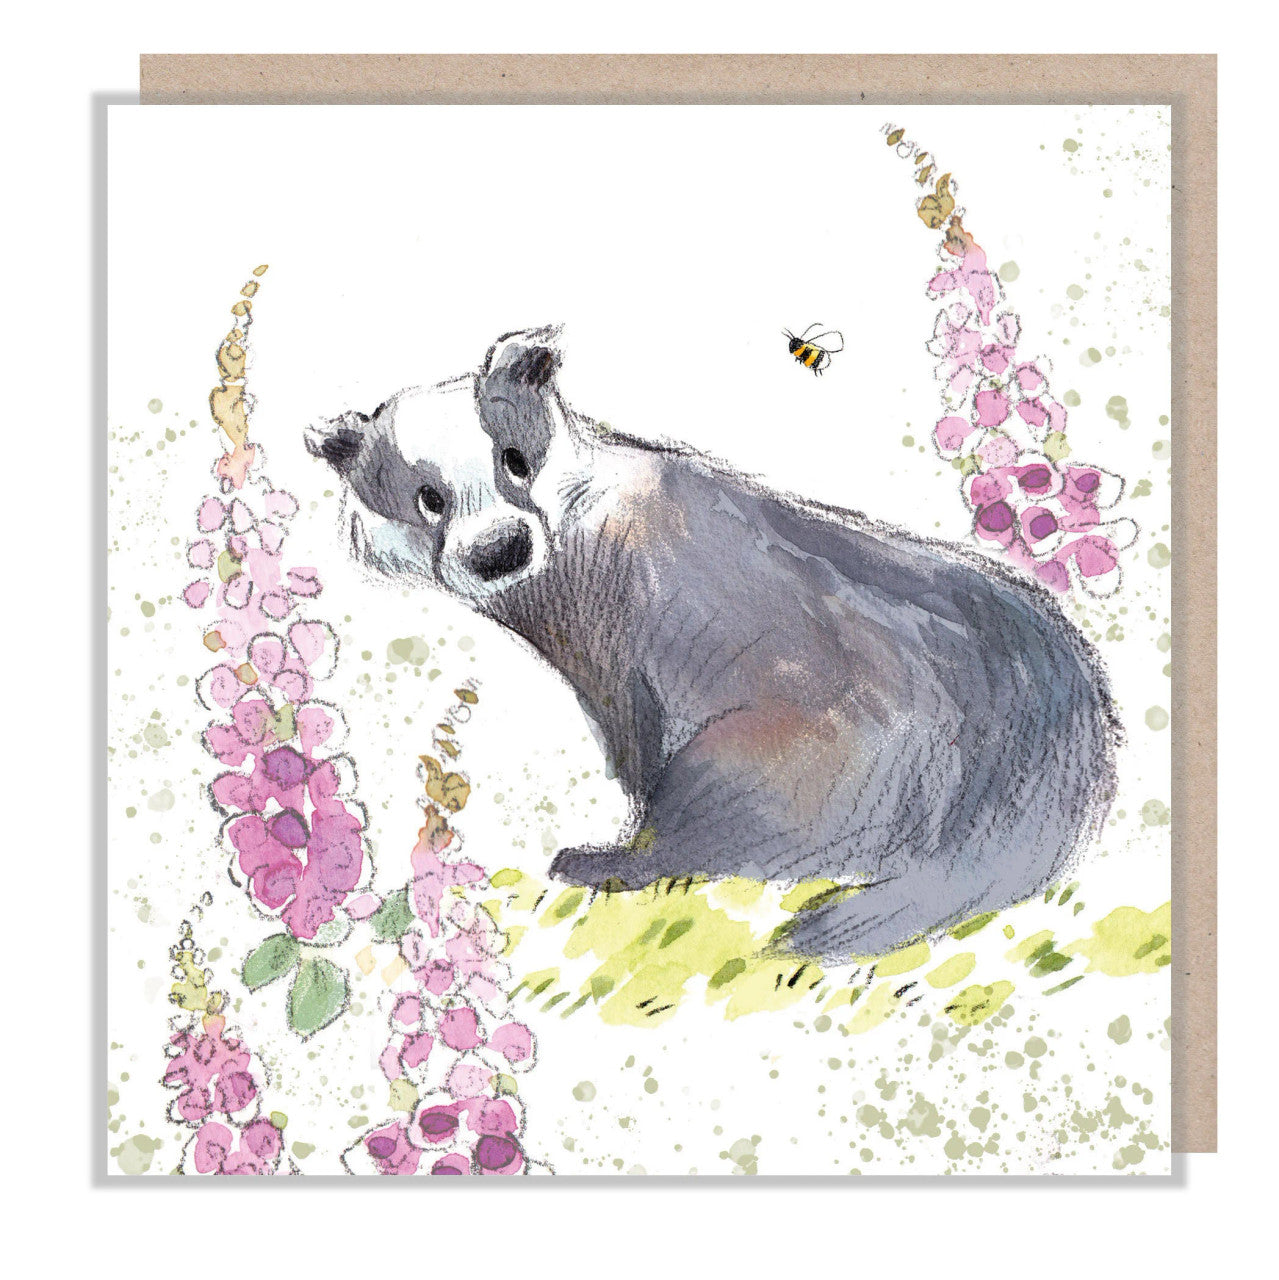 Badger with Foxgloves Greetings Card from Paper Shed Designs